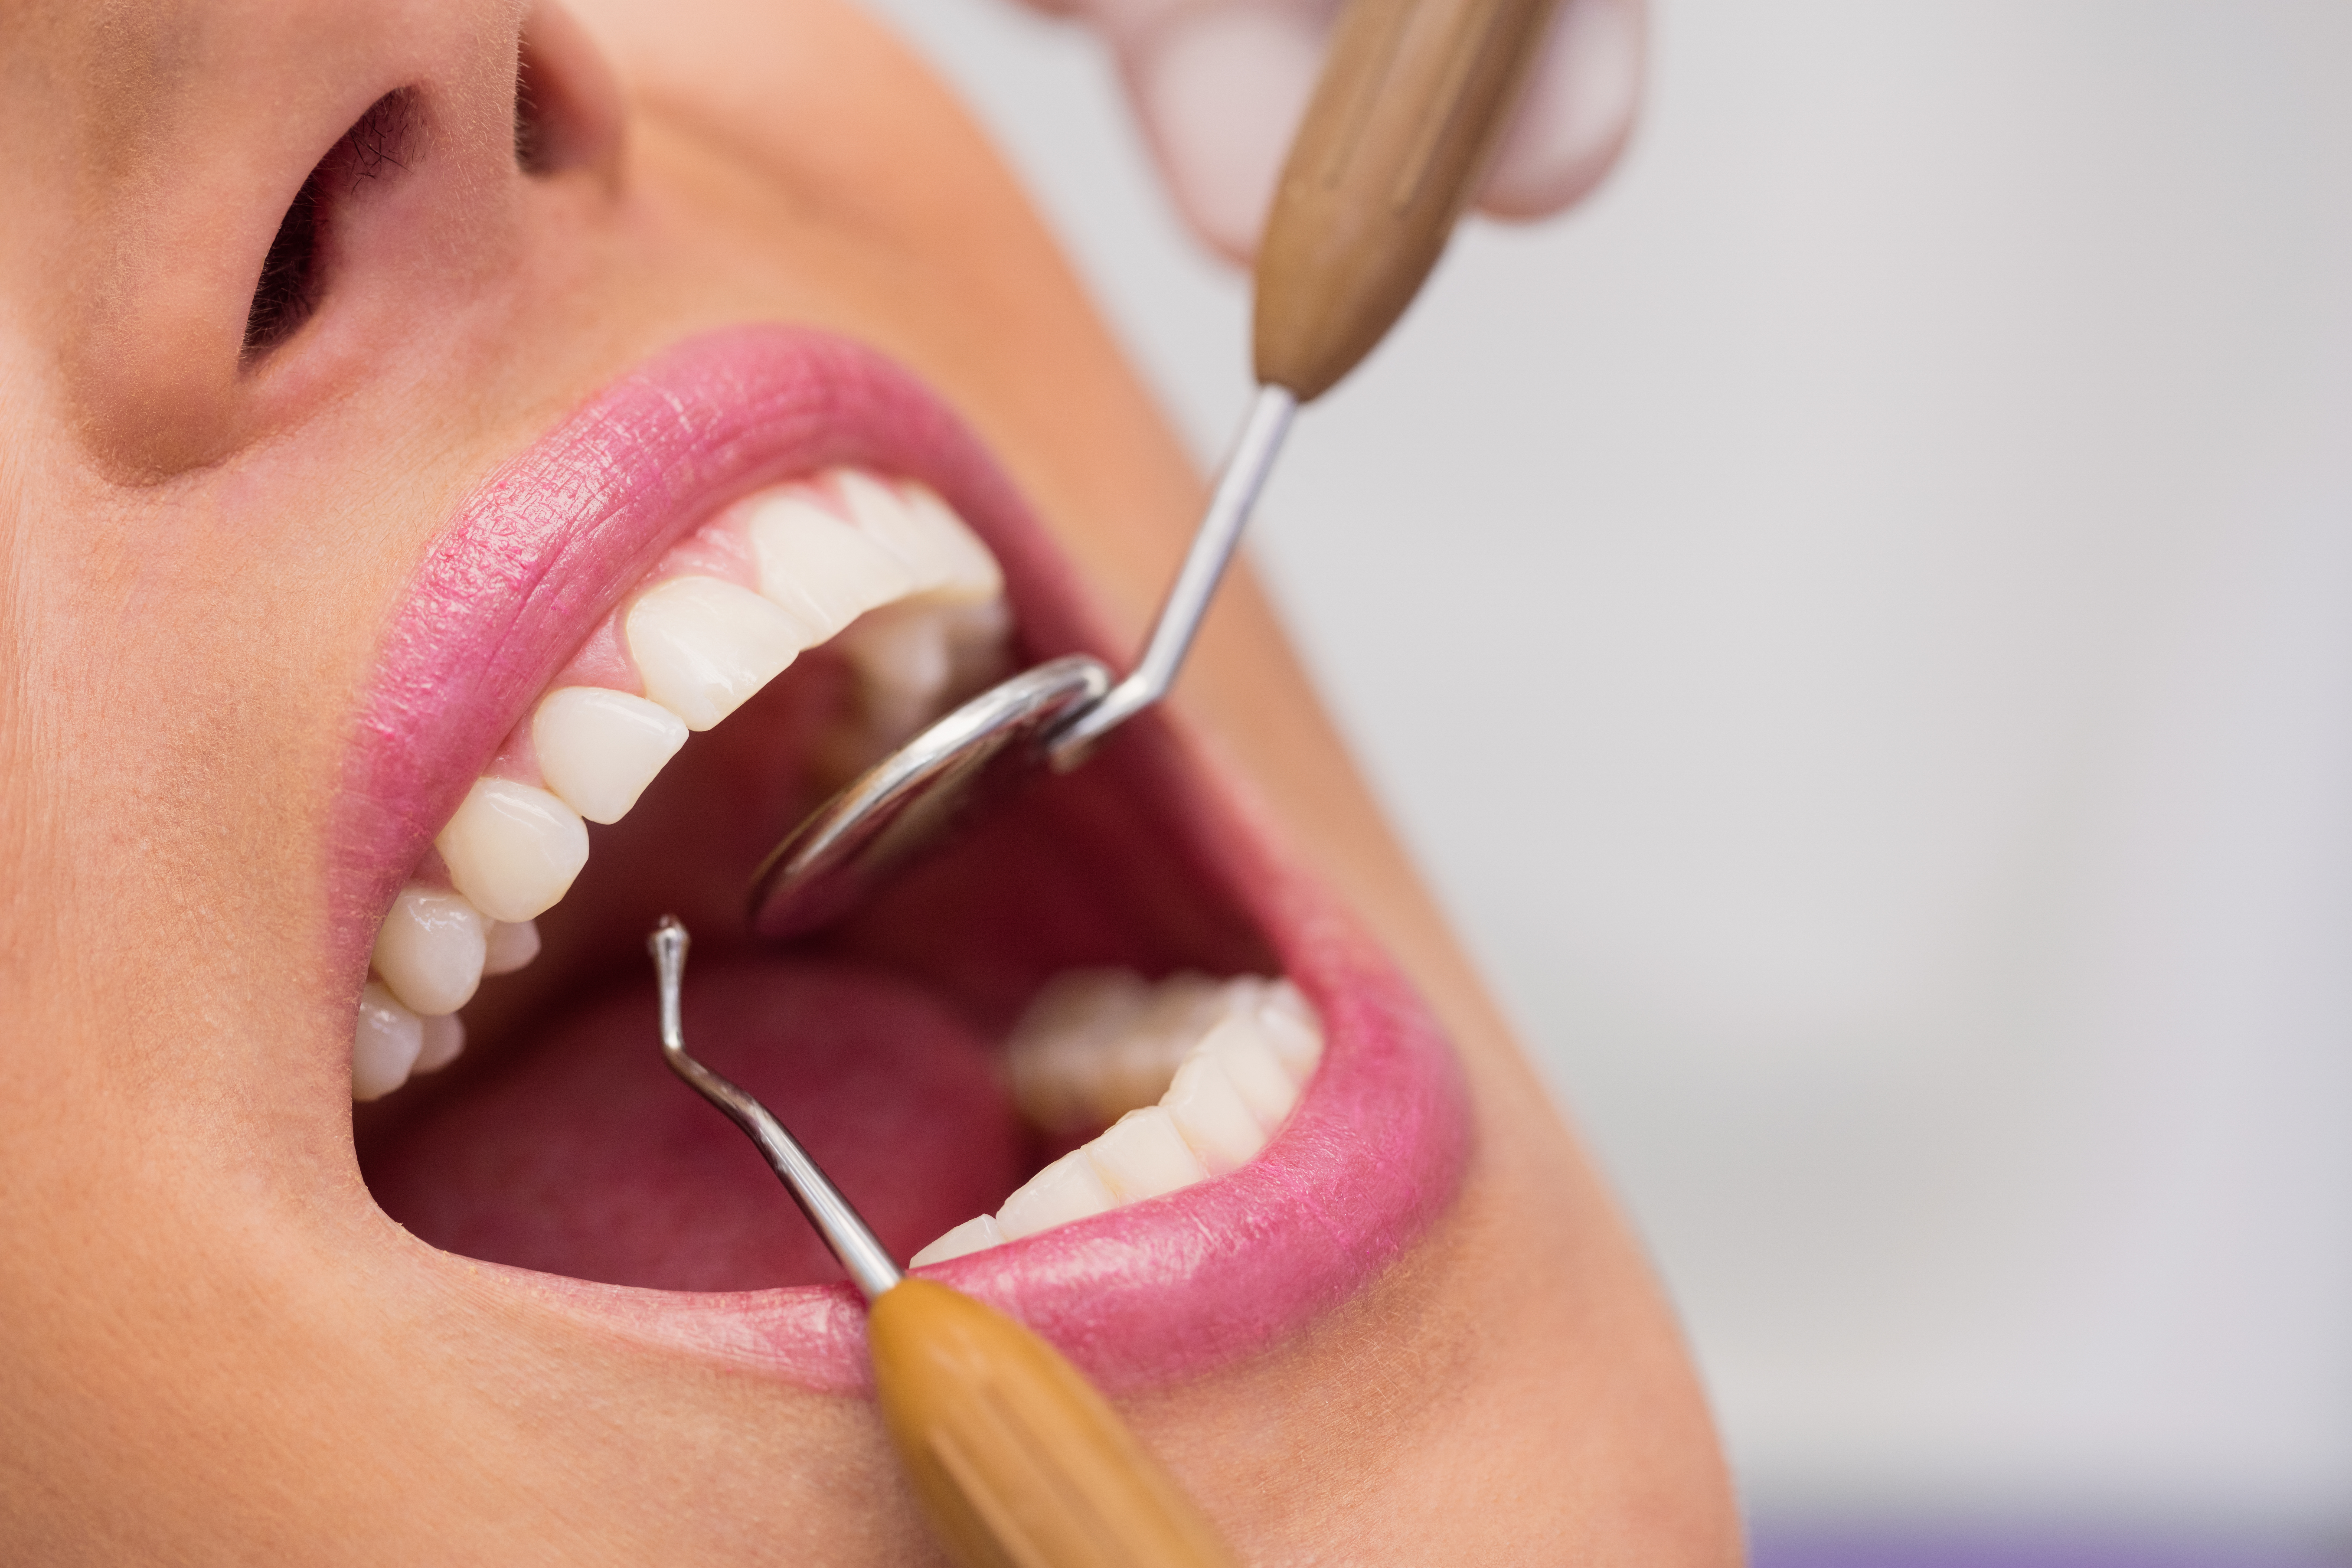 Extraction of Teeth Treatment In Hyderabad